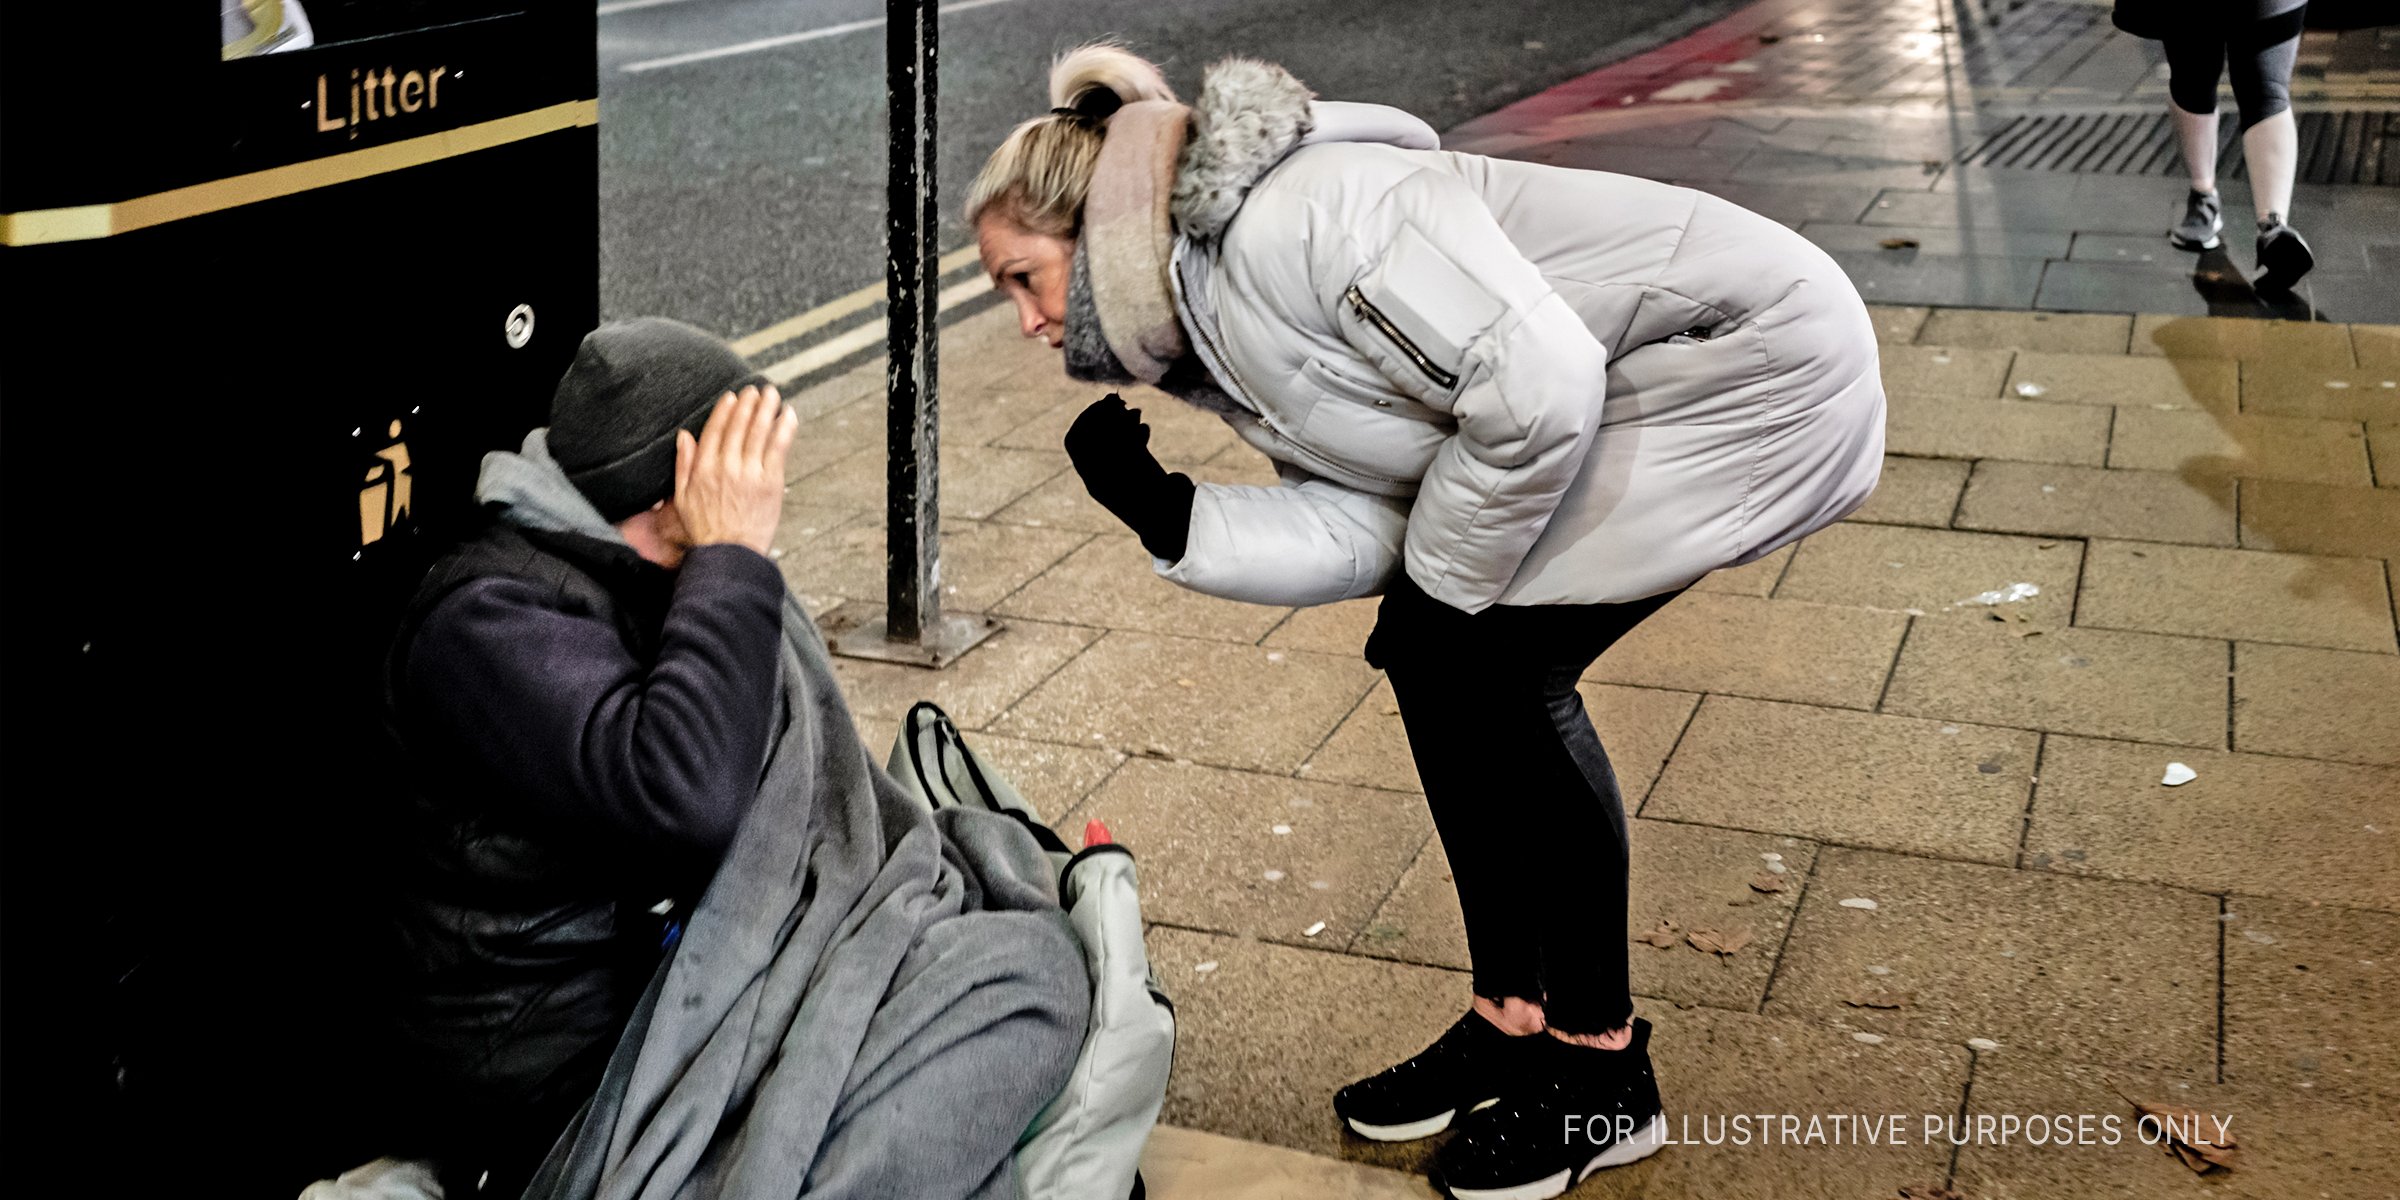 Middle-aged woman staring at a beggar on the street. | Source: Flickr/Ian Livesey (Public Domain)